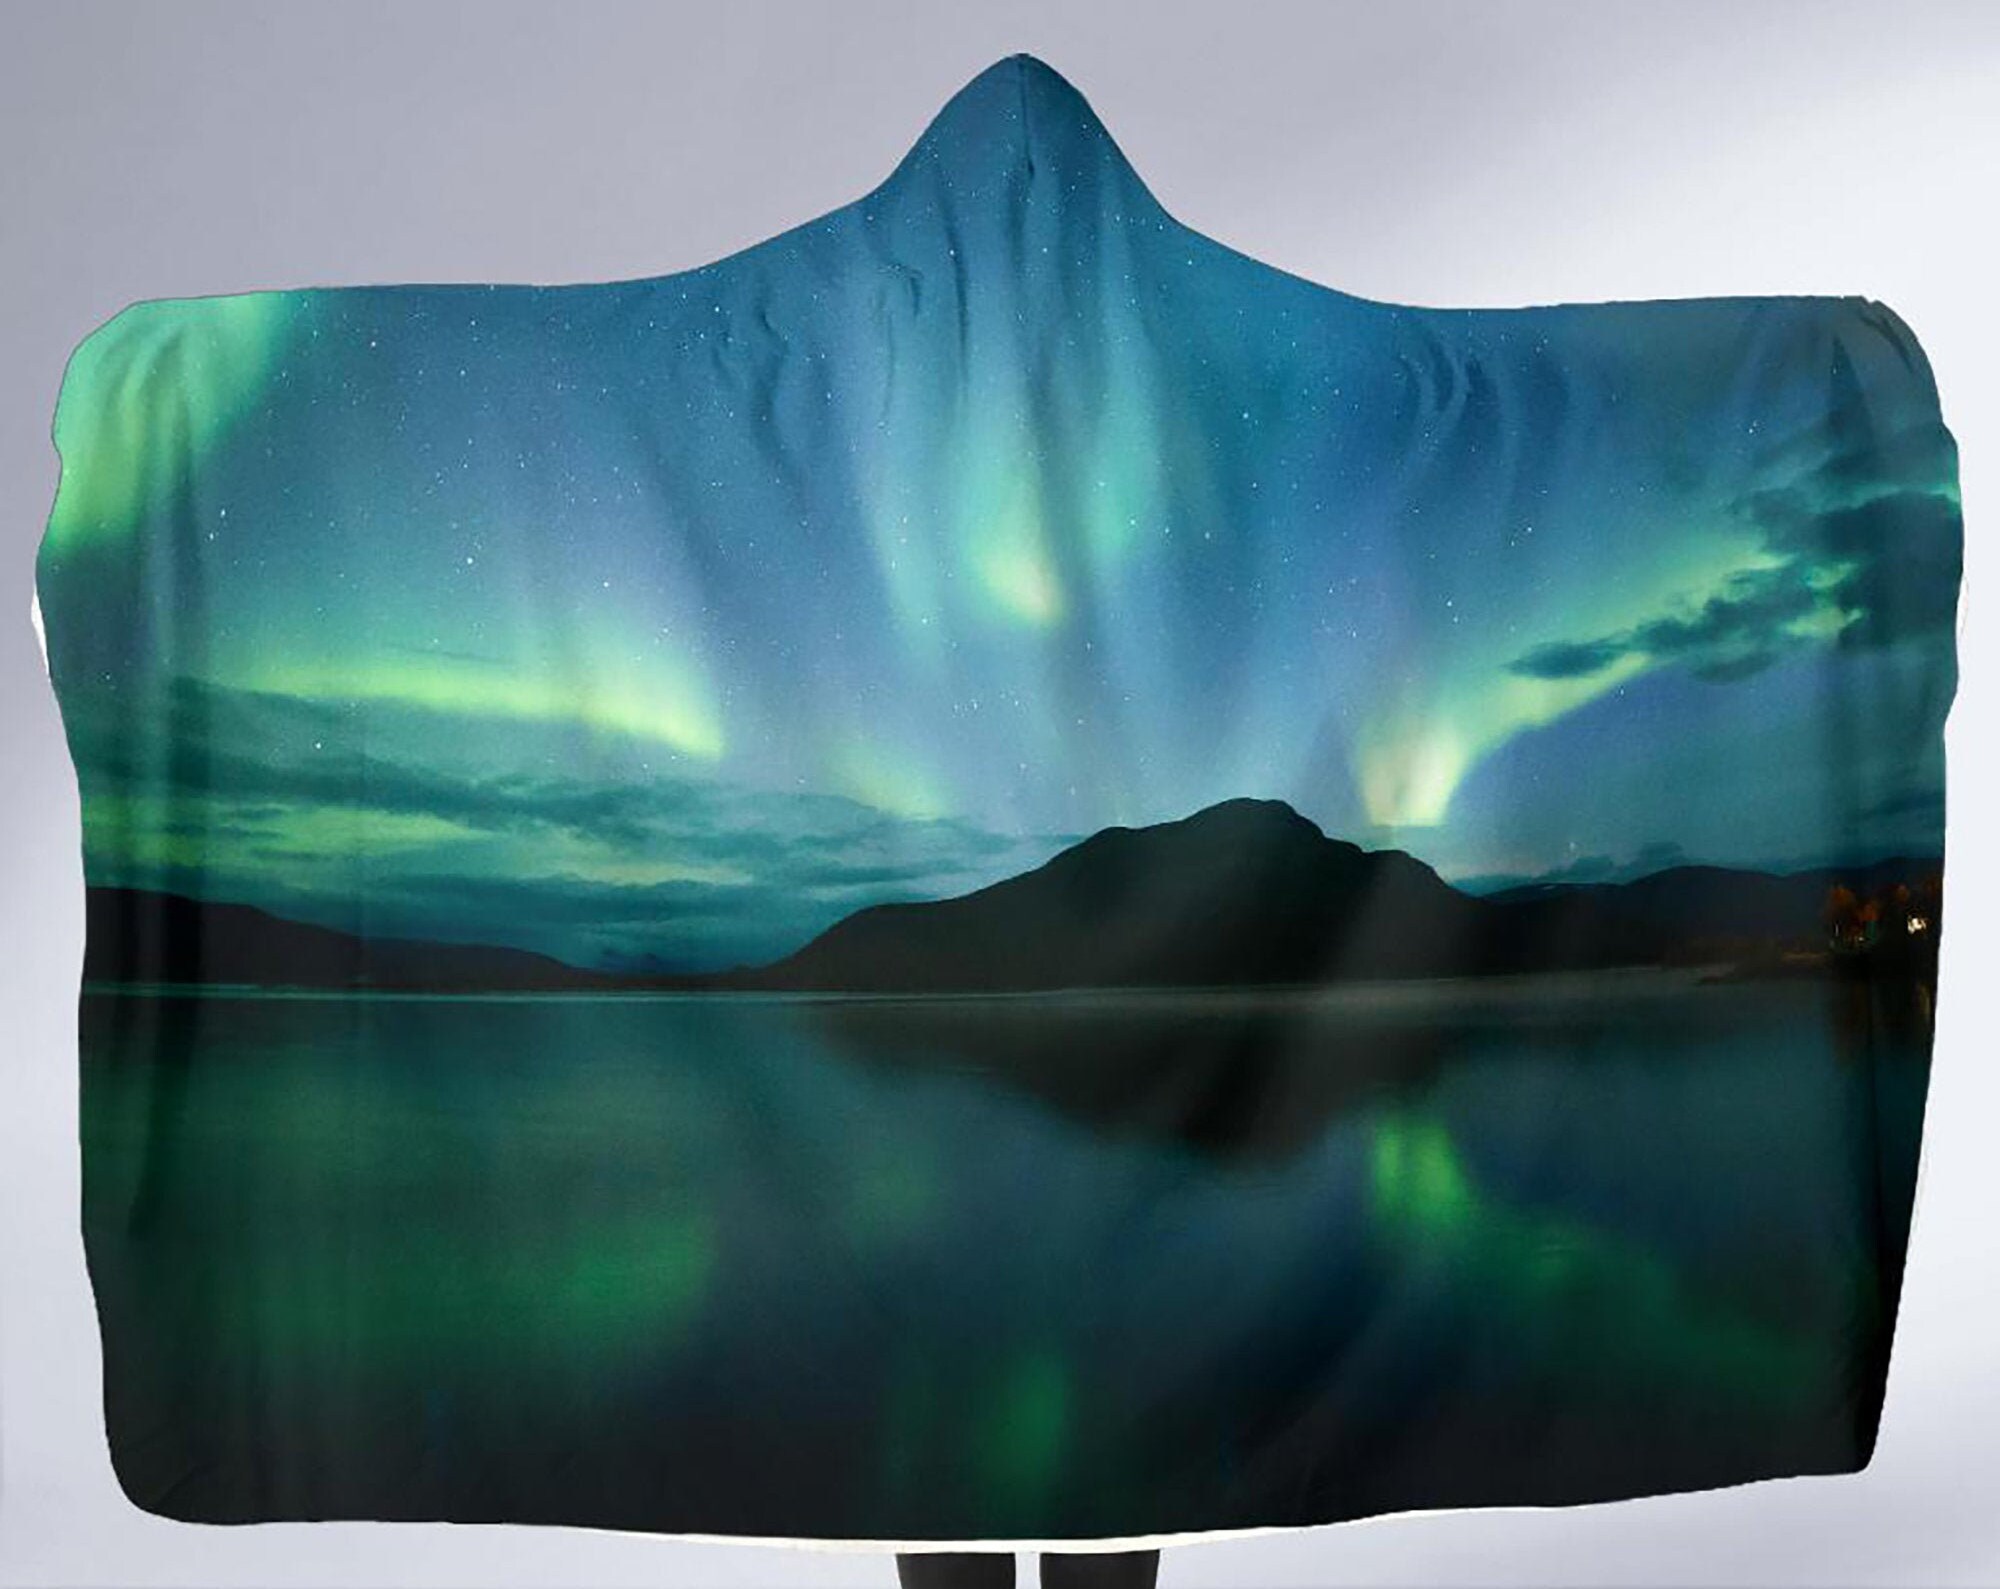 Dancing Night Sky Hooded Blanket, Adult and Youth Sizes, Soft Fleece Blanket with a Hood, Northern Lights Throw, Cozy Aurora Borealis